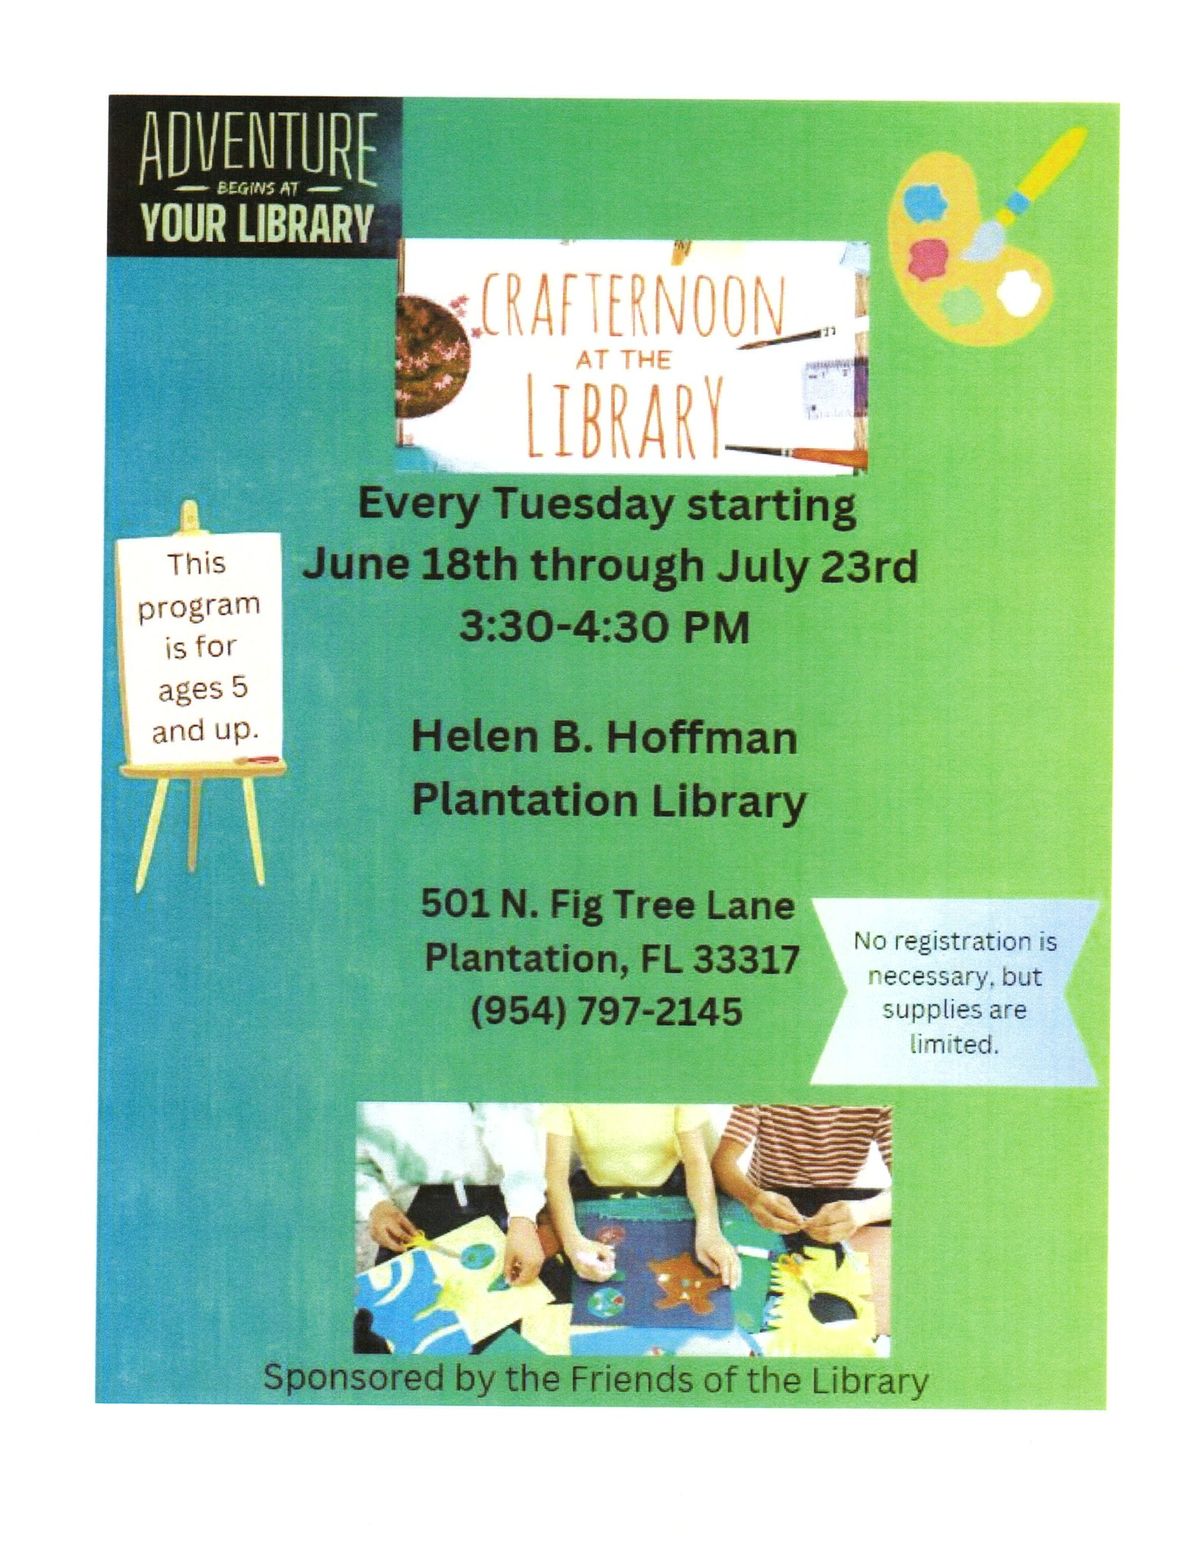 Crafternoon at the Library